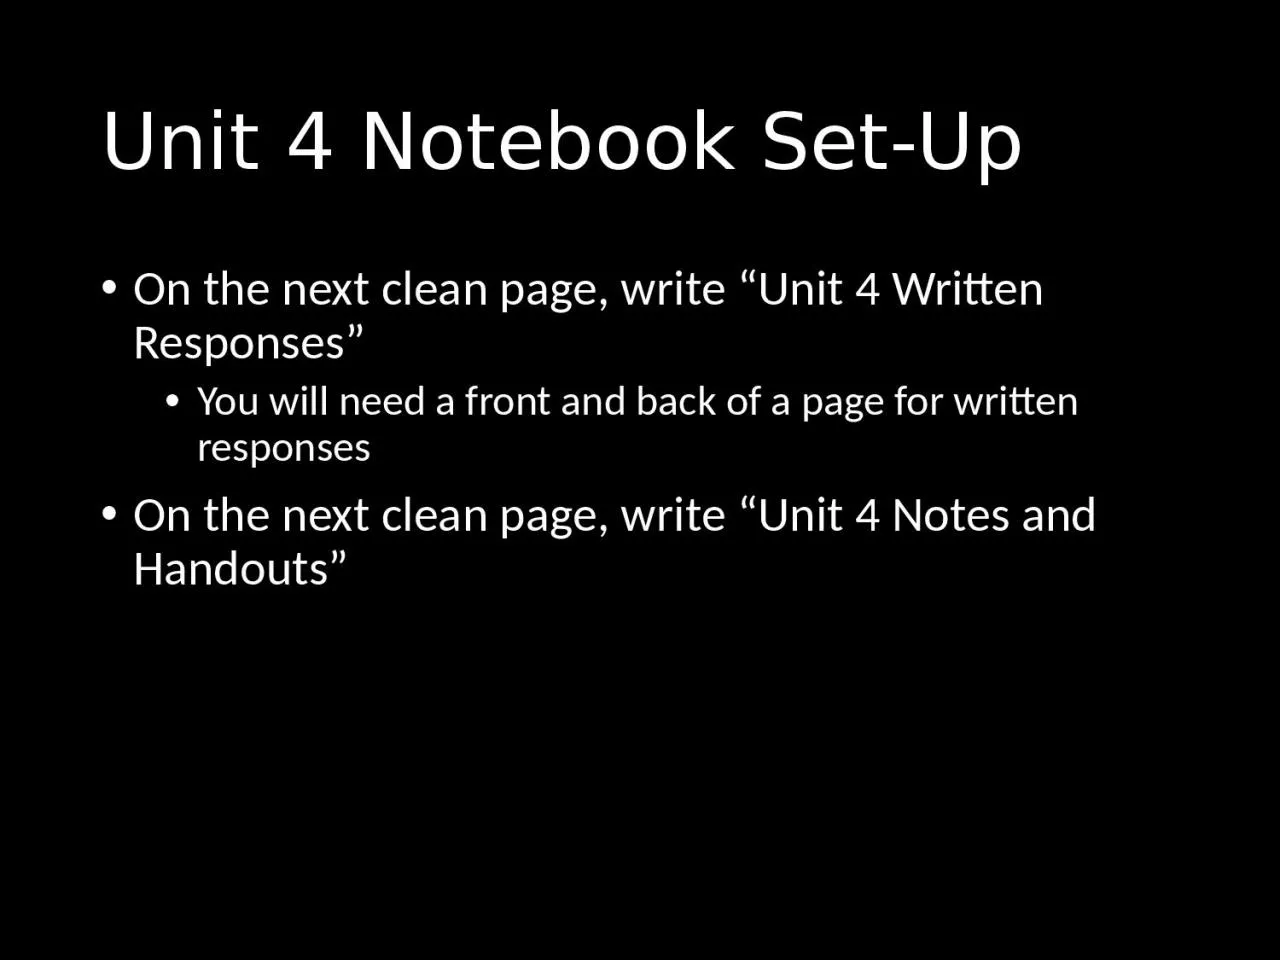 Unit 4 Notebook Set-Up On the next clean page, write “Unit 4 Written Responses”